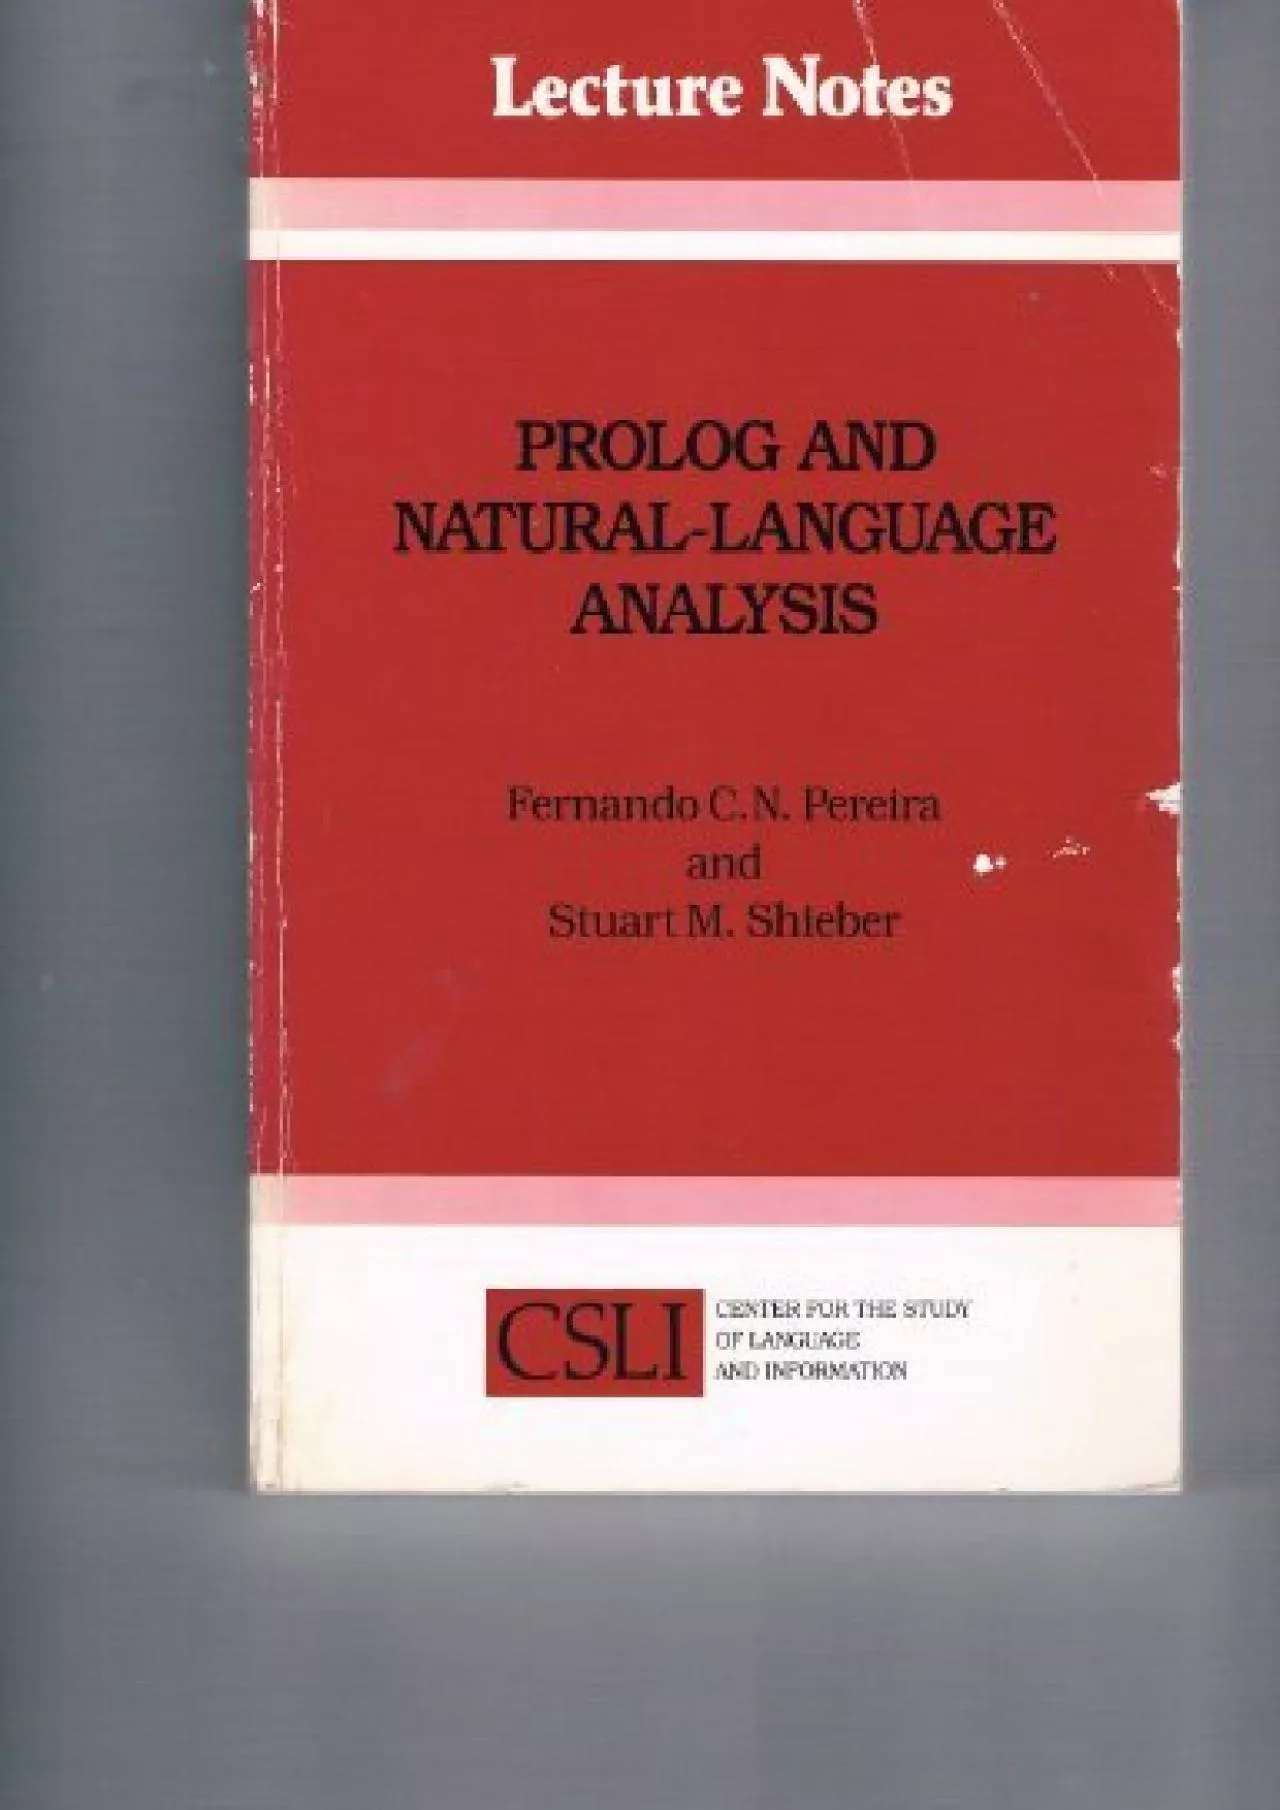 [PDF]-Prolog and Natural-Language Analysis (Center for the Study of Language and Information